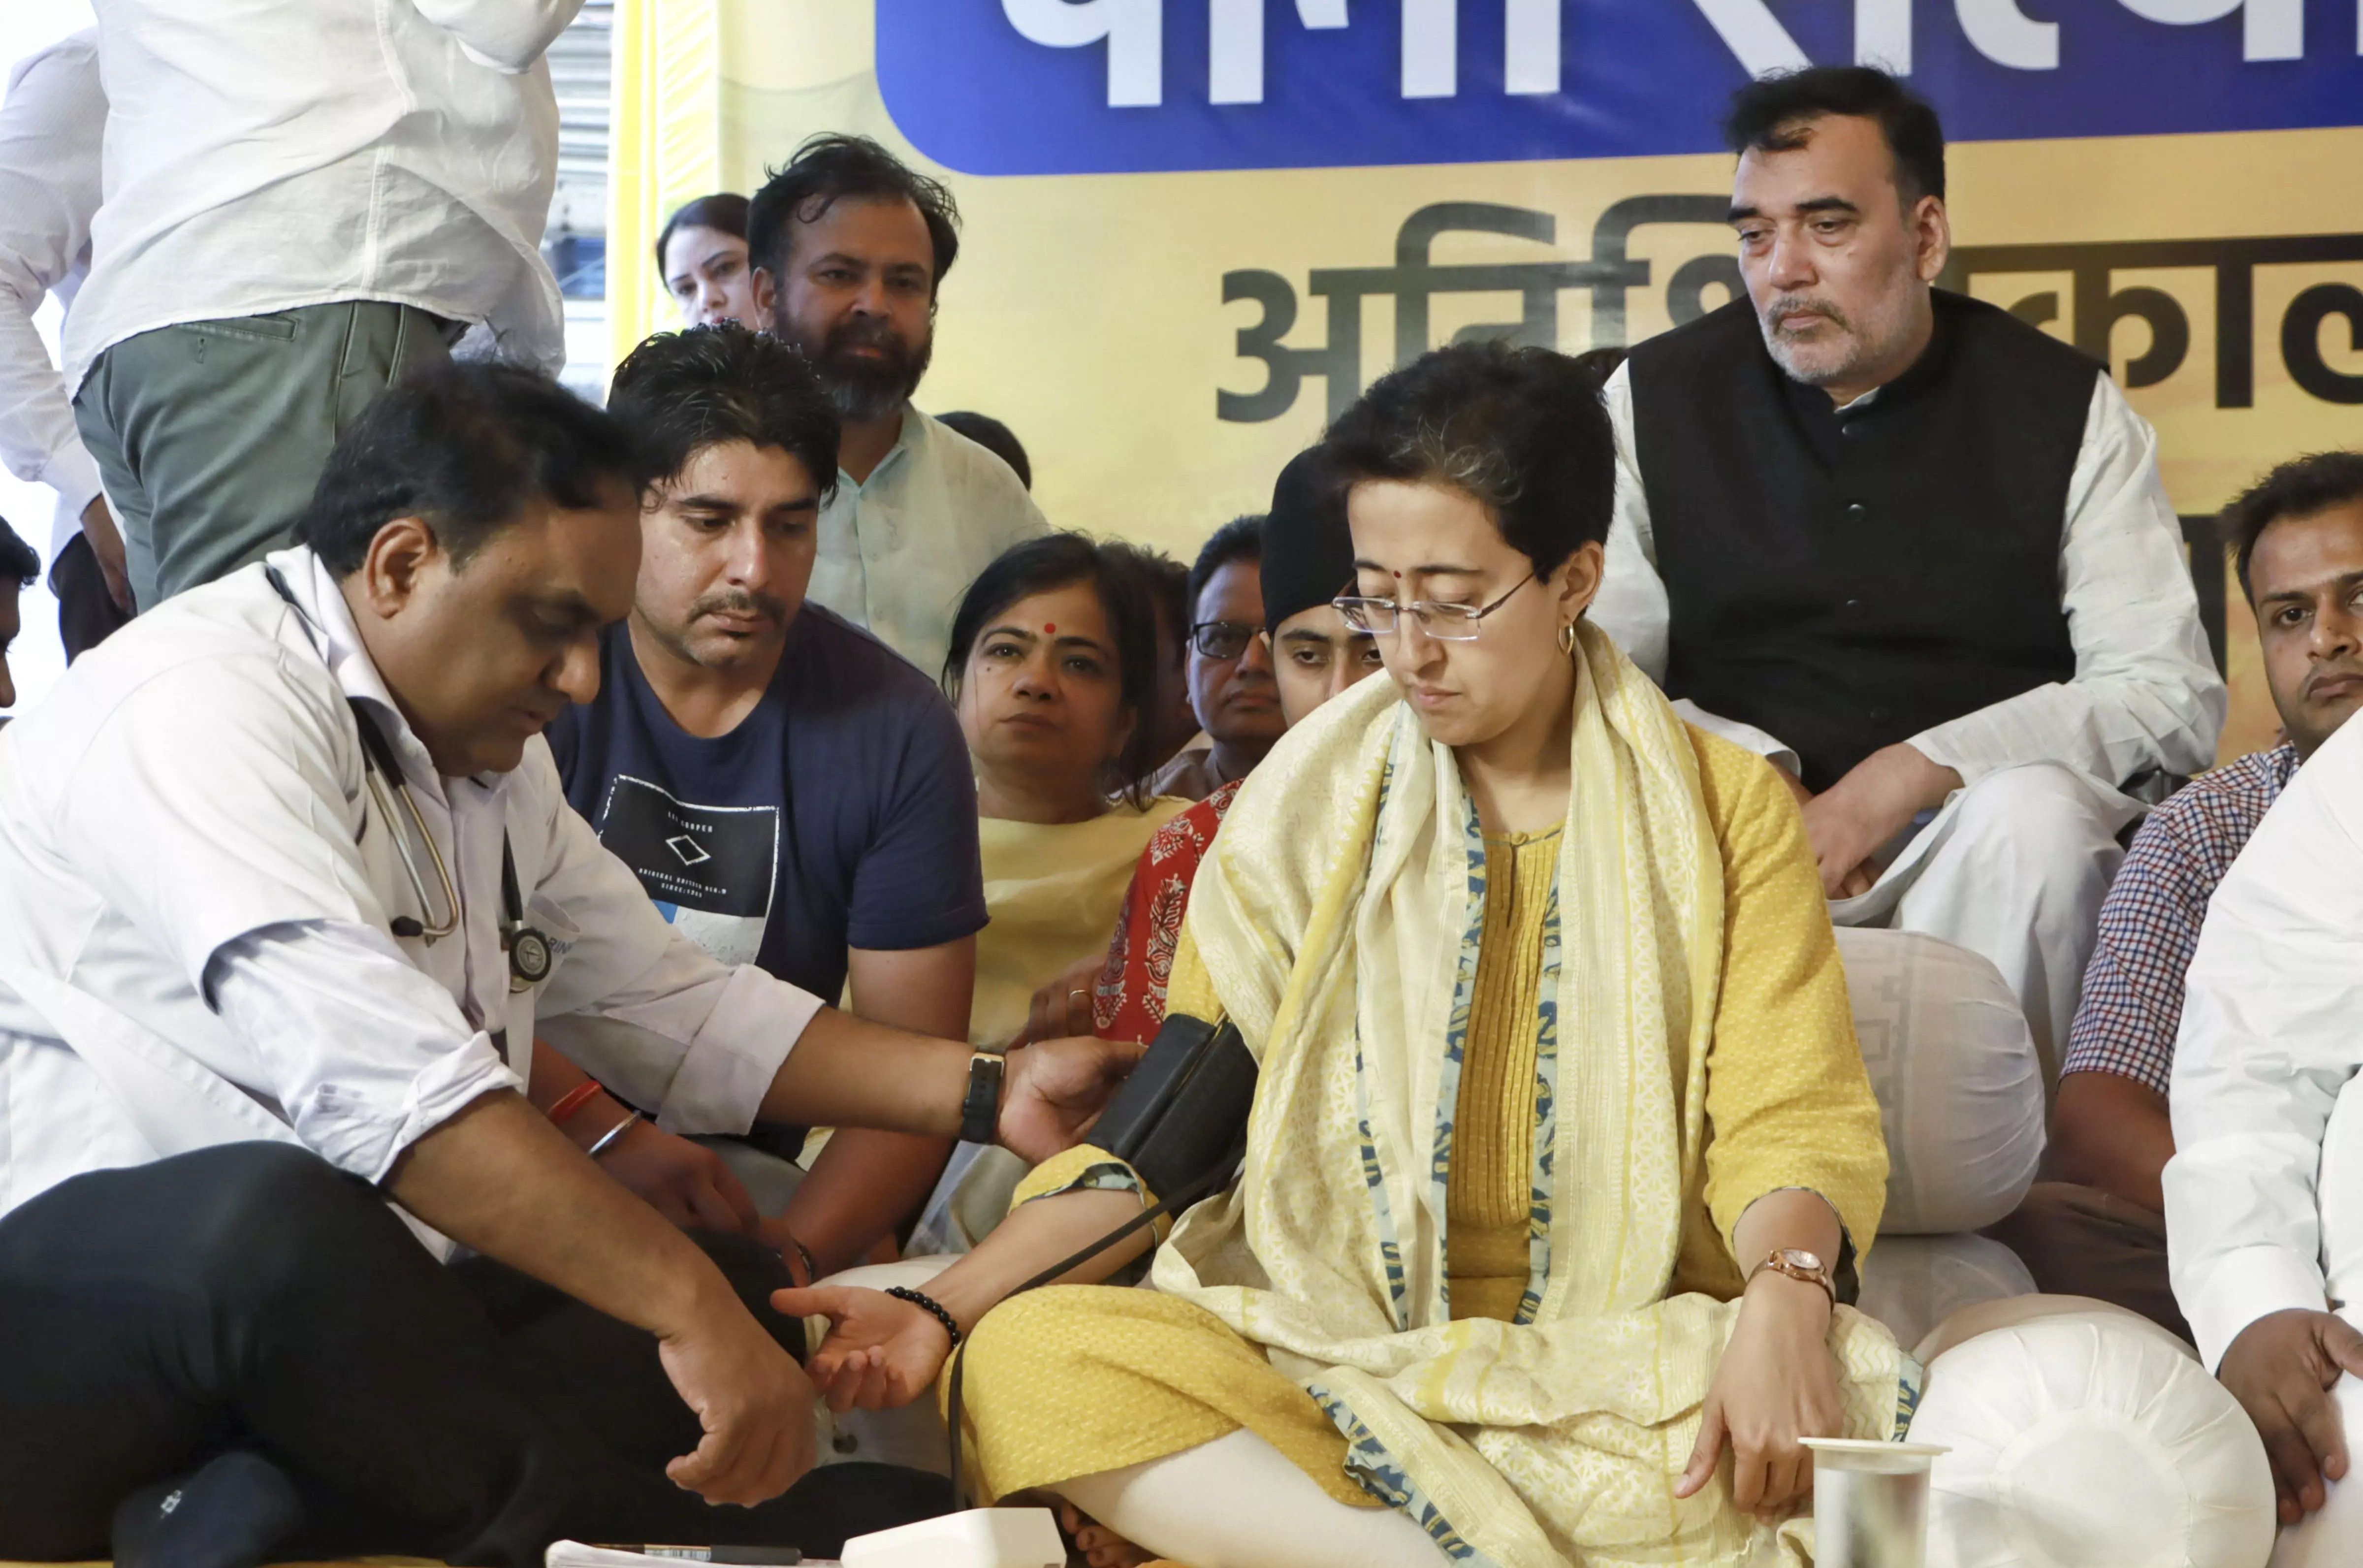 Until 28 lakh Delhiites get water, my indefinite fast will continue: Atishi